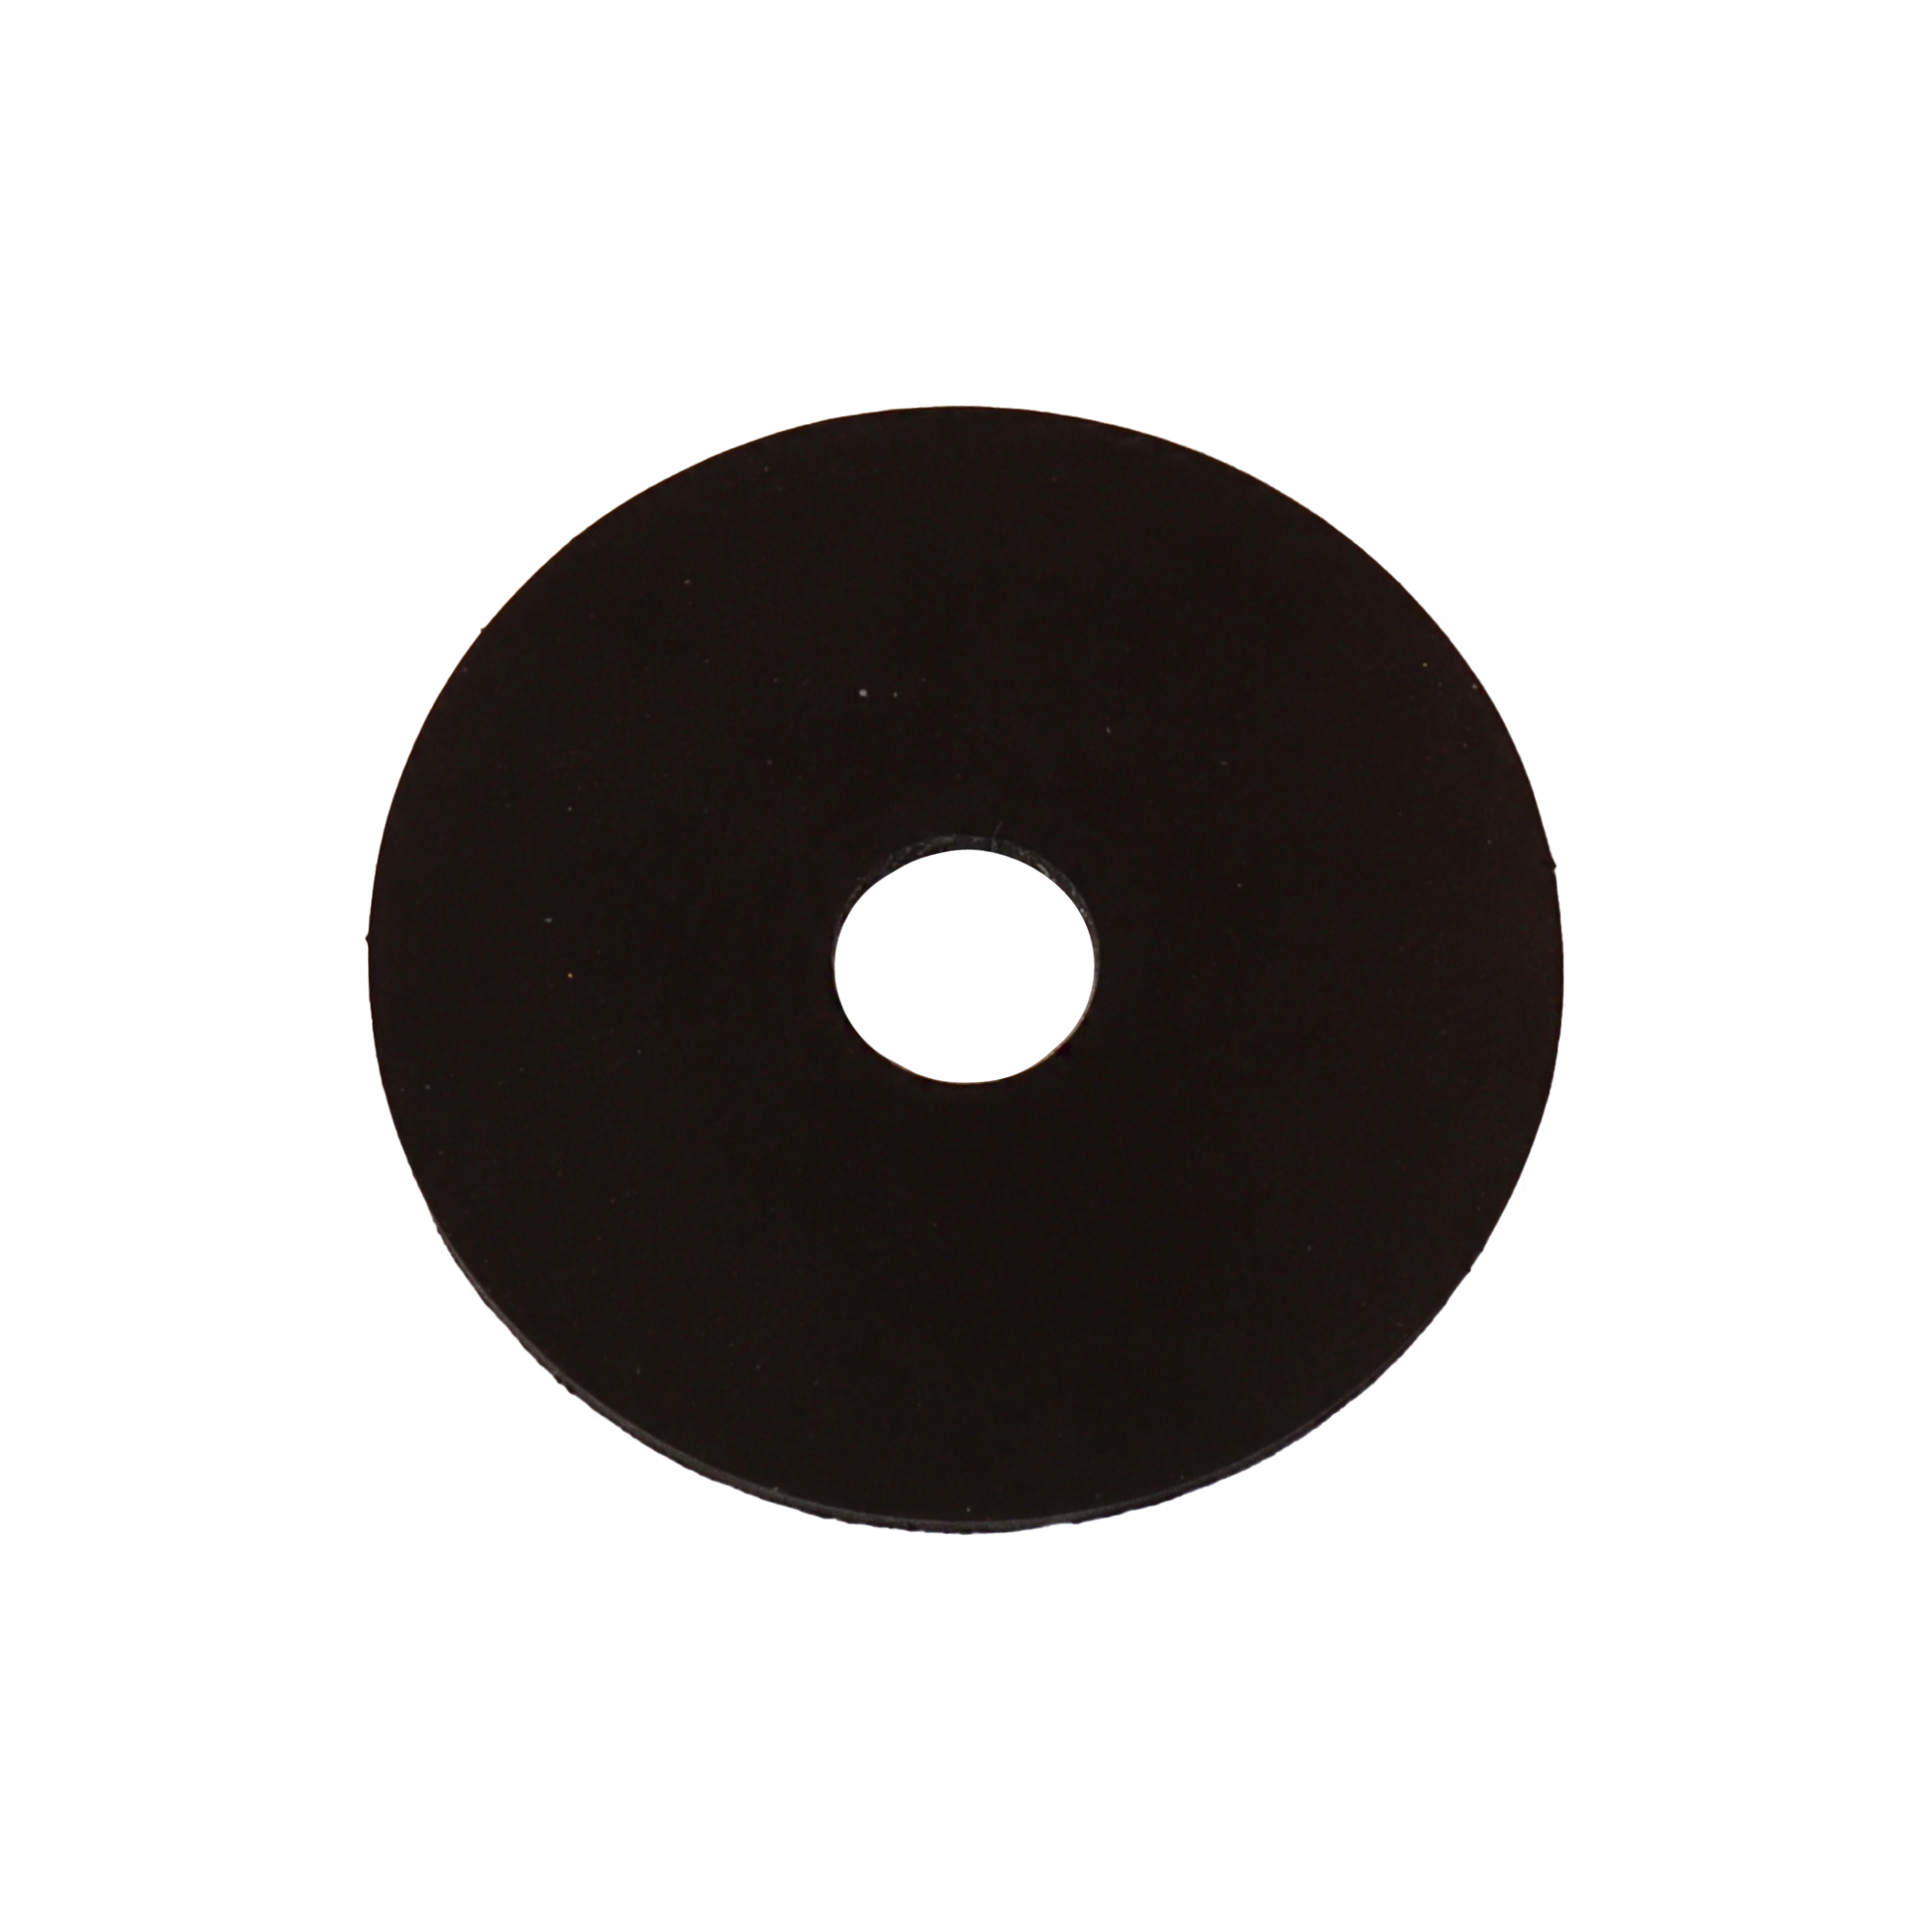 0700 - Replacement Gasket for 1100 and 1109